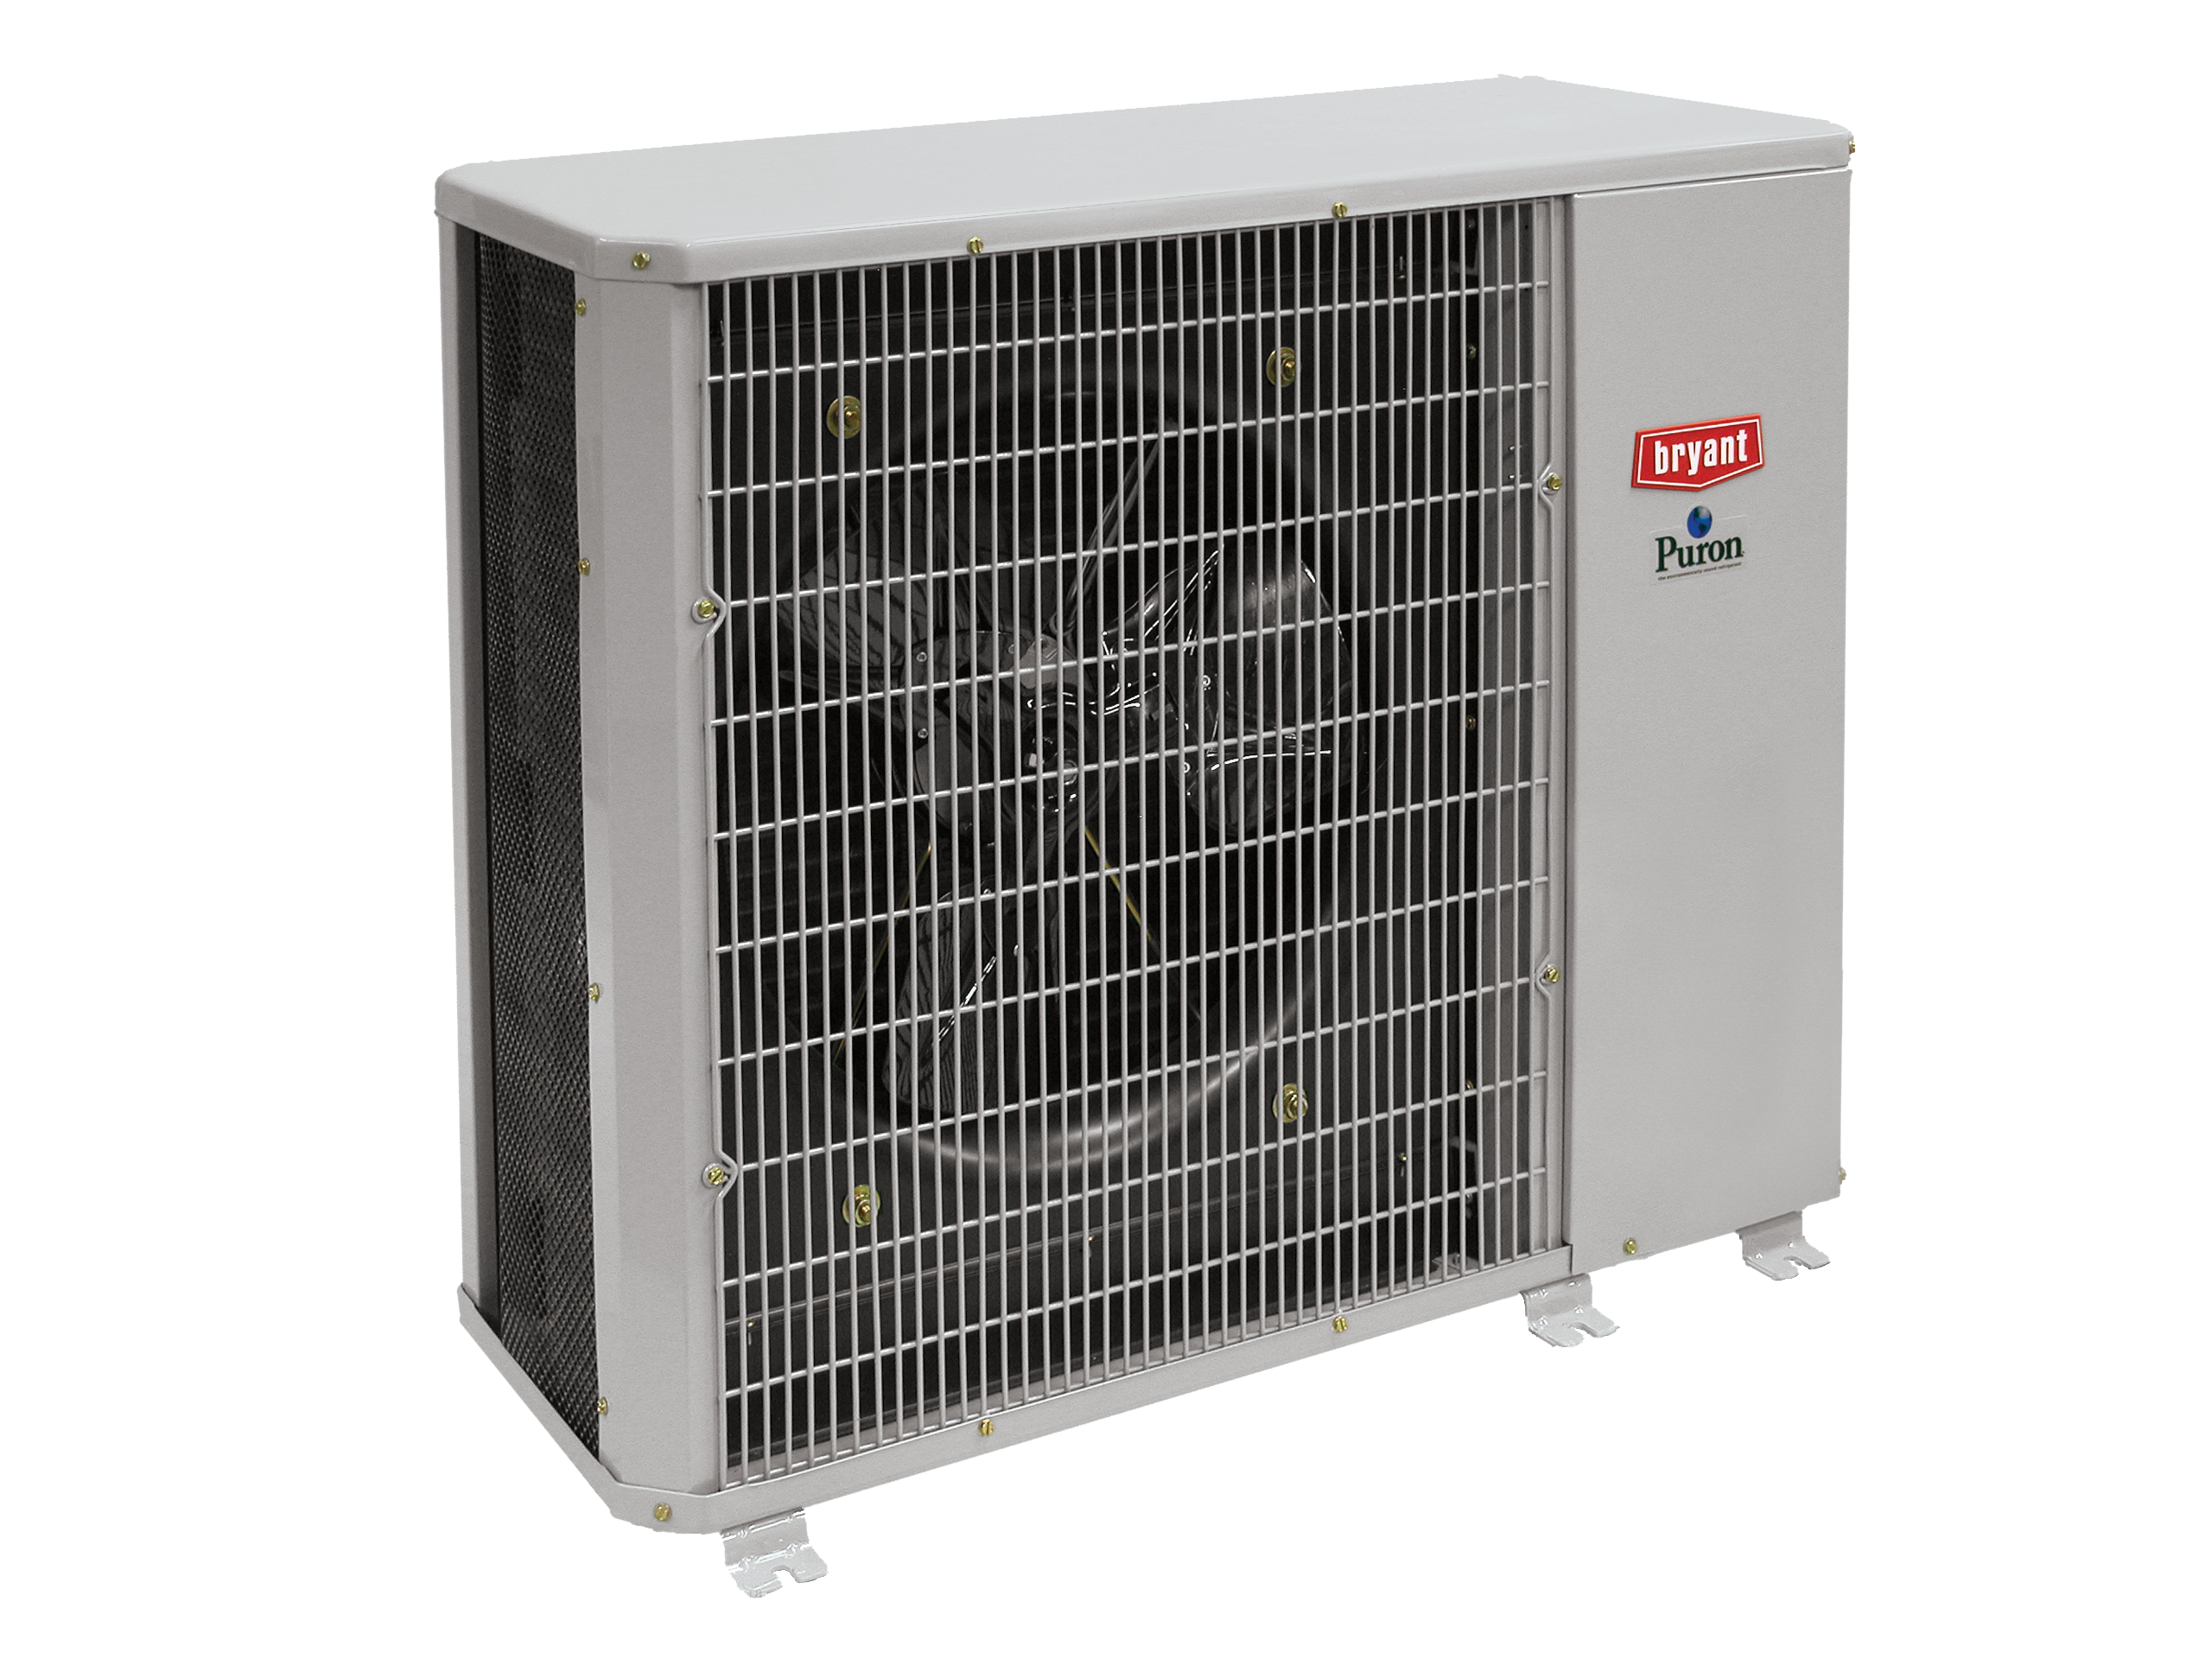 bryant-heat-pump-prices-online-sale-up-to-66-off